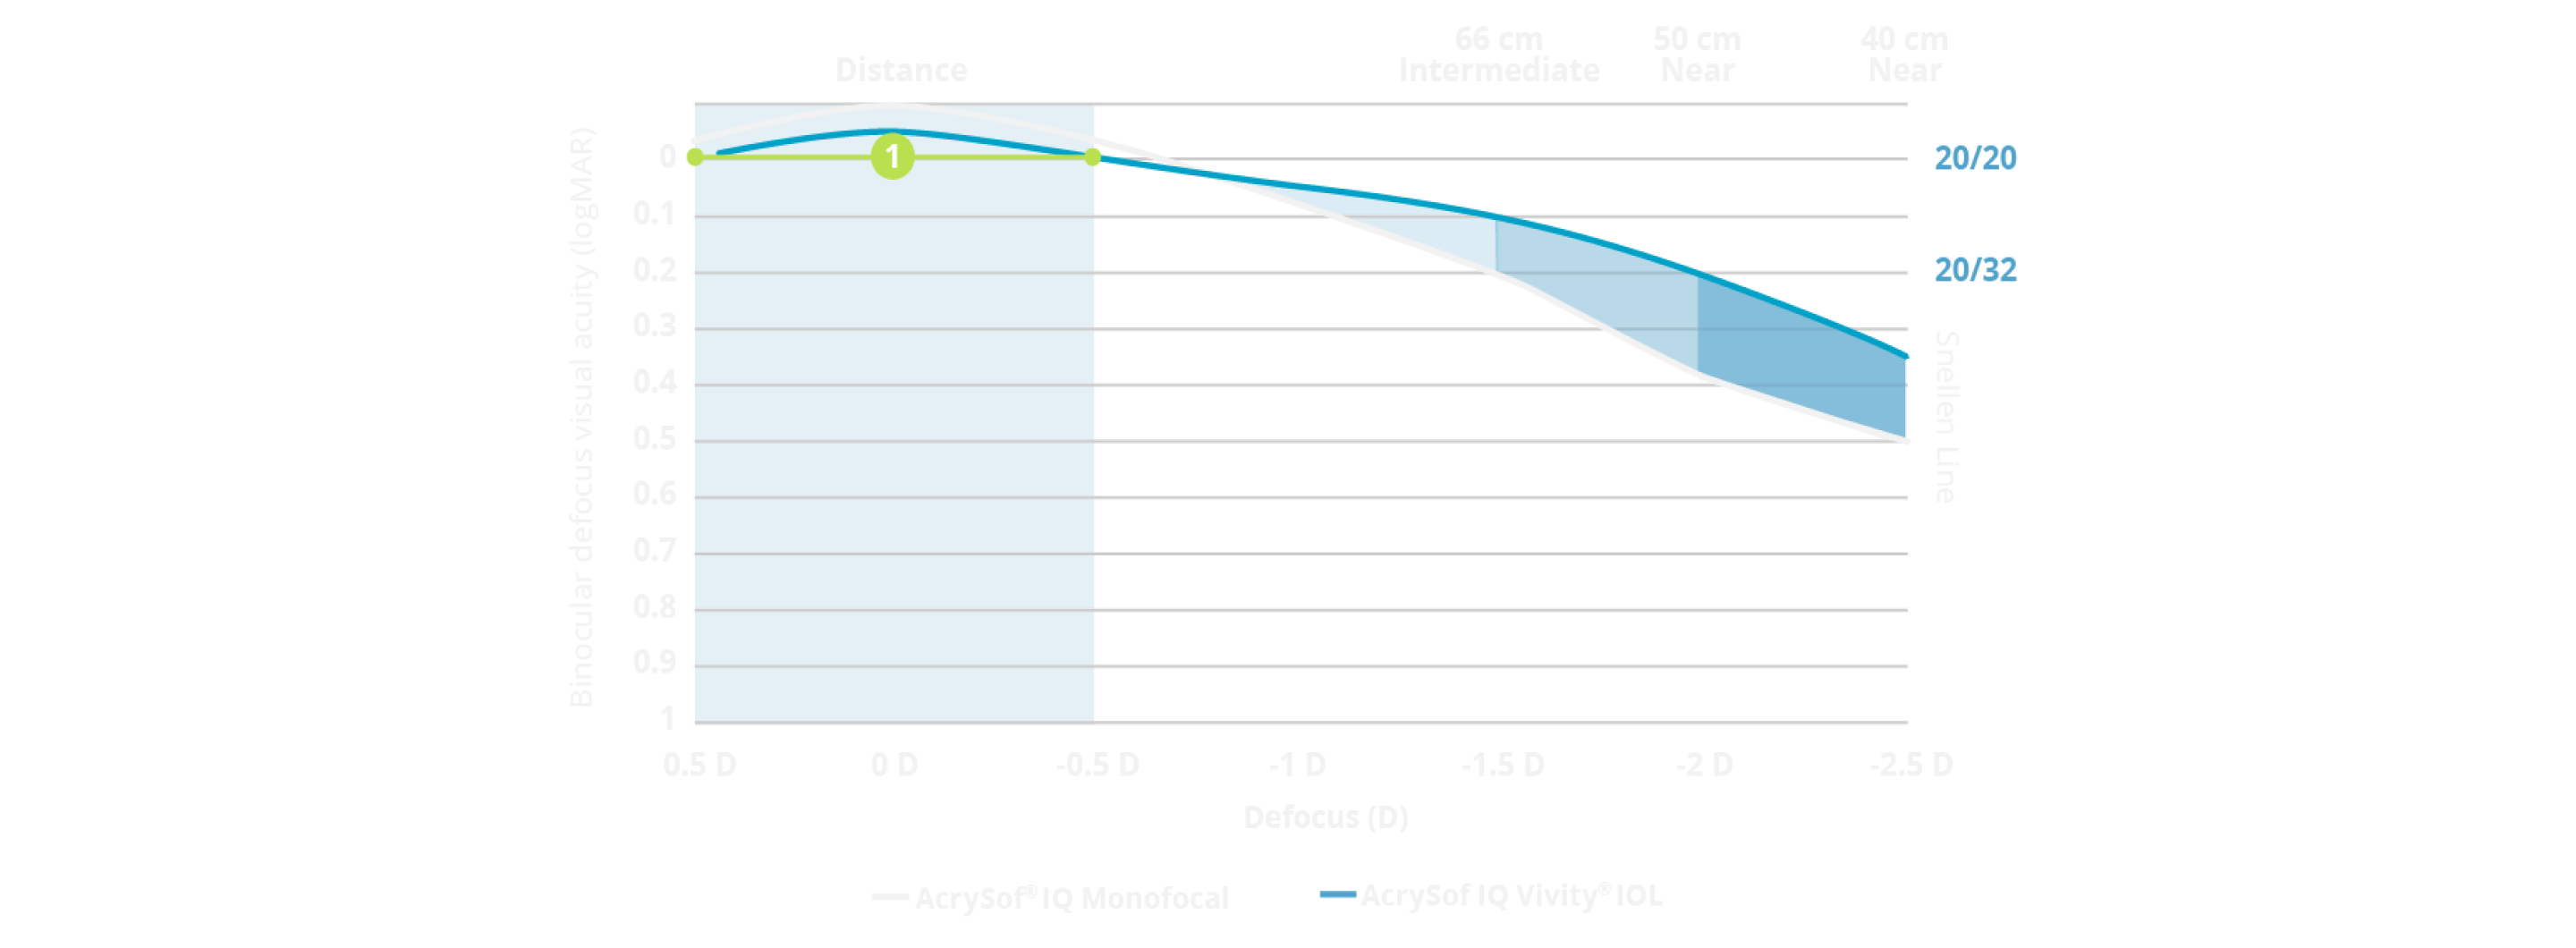 Defocus curve graph showing that the defocus range for AcrySof IQ Vivity® is comparable to that of AcrySof® IQ monofocal. A portion of the graph is highlighted showing that Vivity® patients can achieve 20/20 (0 logMAR) visual acuity even with a refractive miss of ±0.5 diopters.